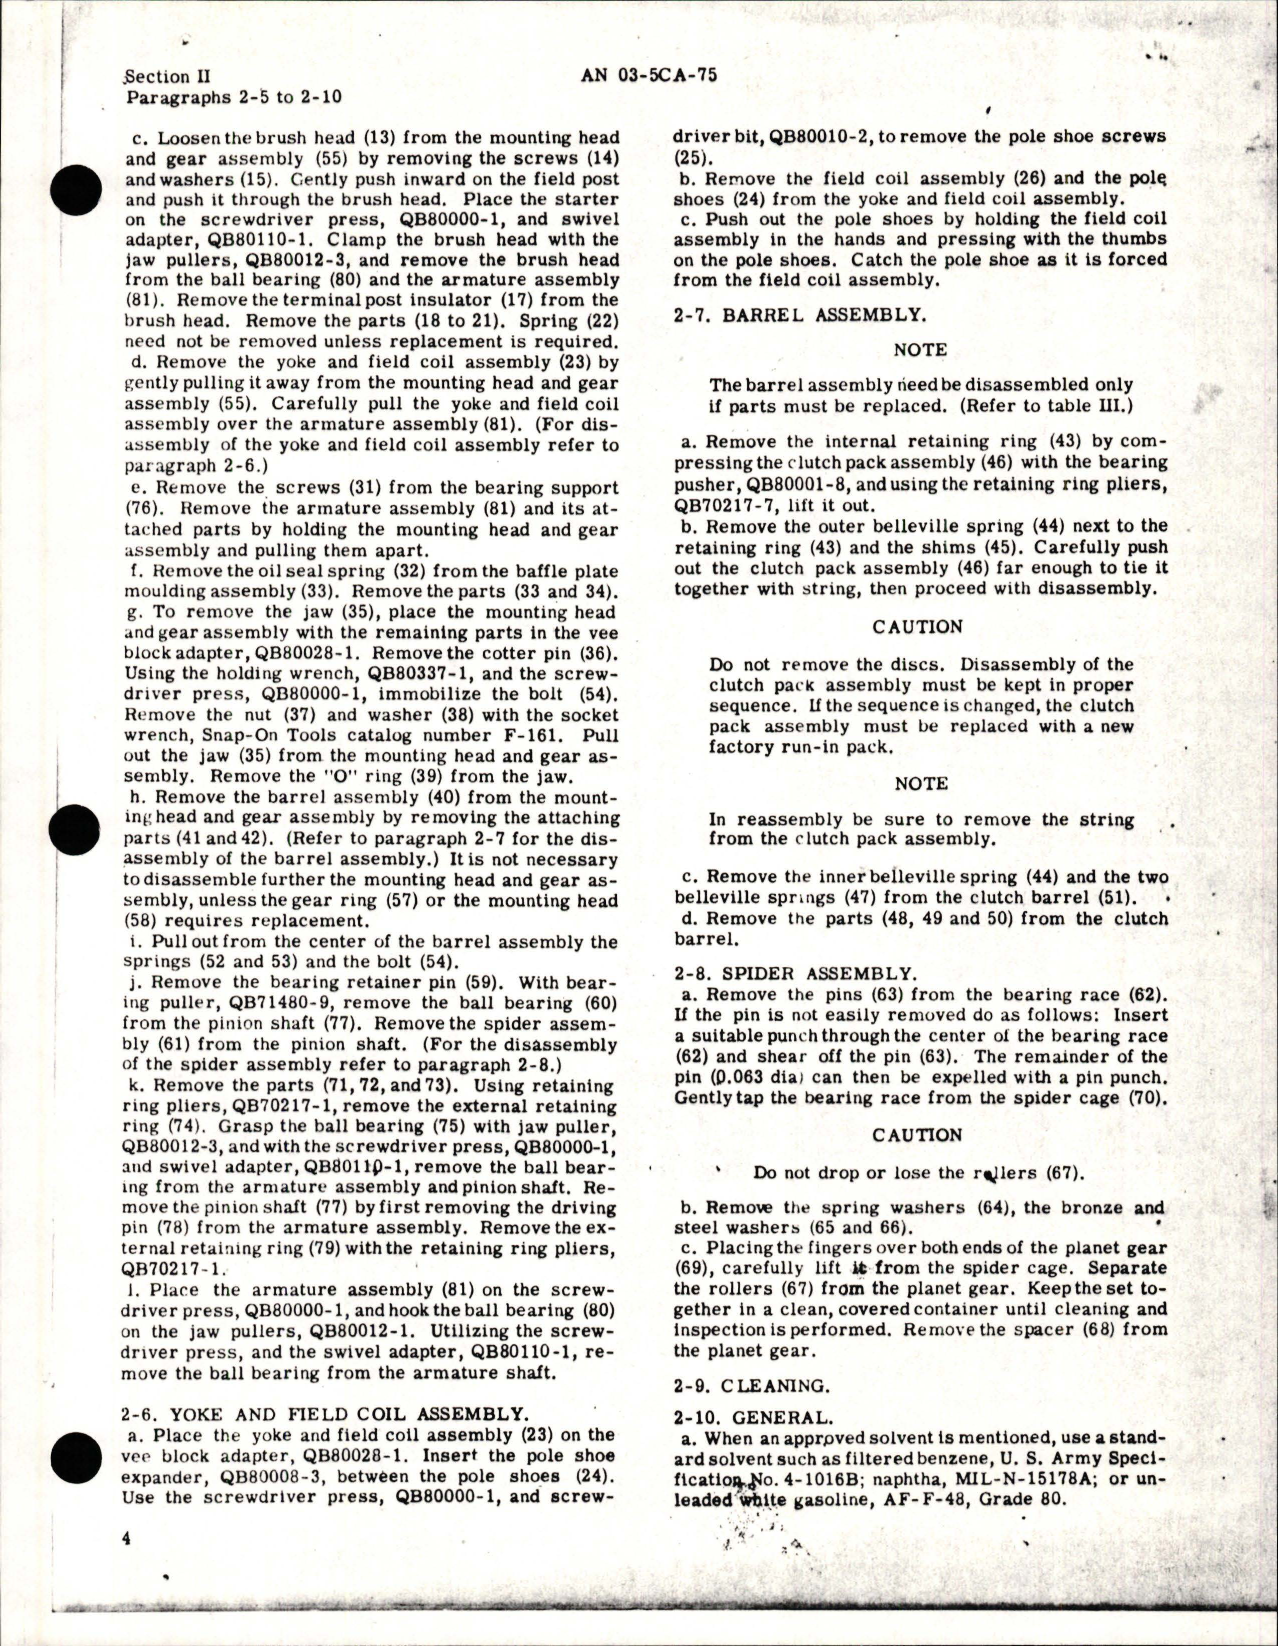 Sample page 9 from AirCorps Library document: Overhaul Instructions for Direct Cranking Electric Starter - Part 36E21-11-A